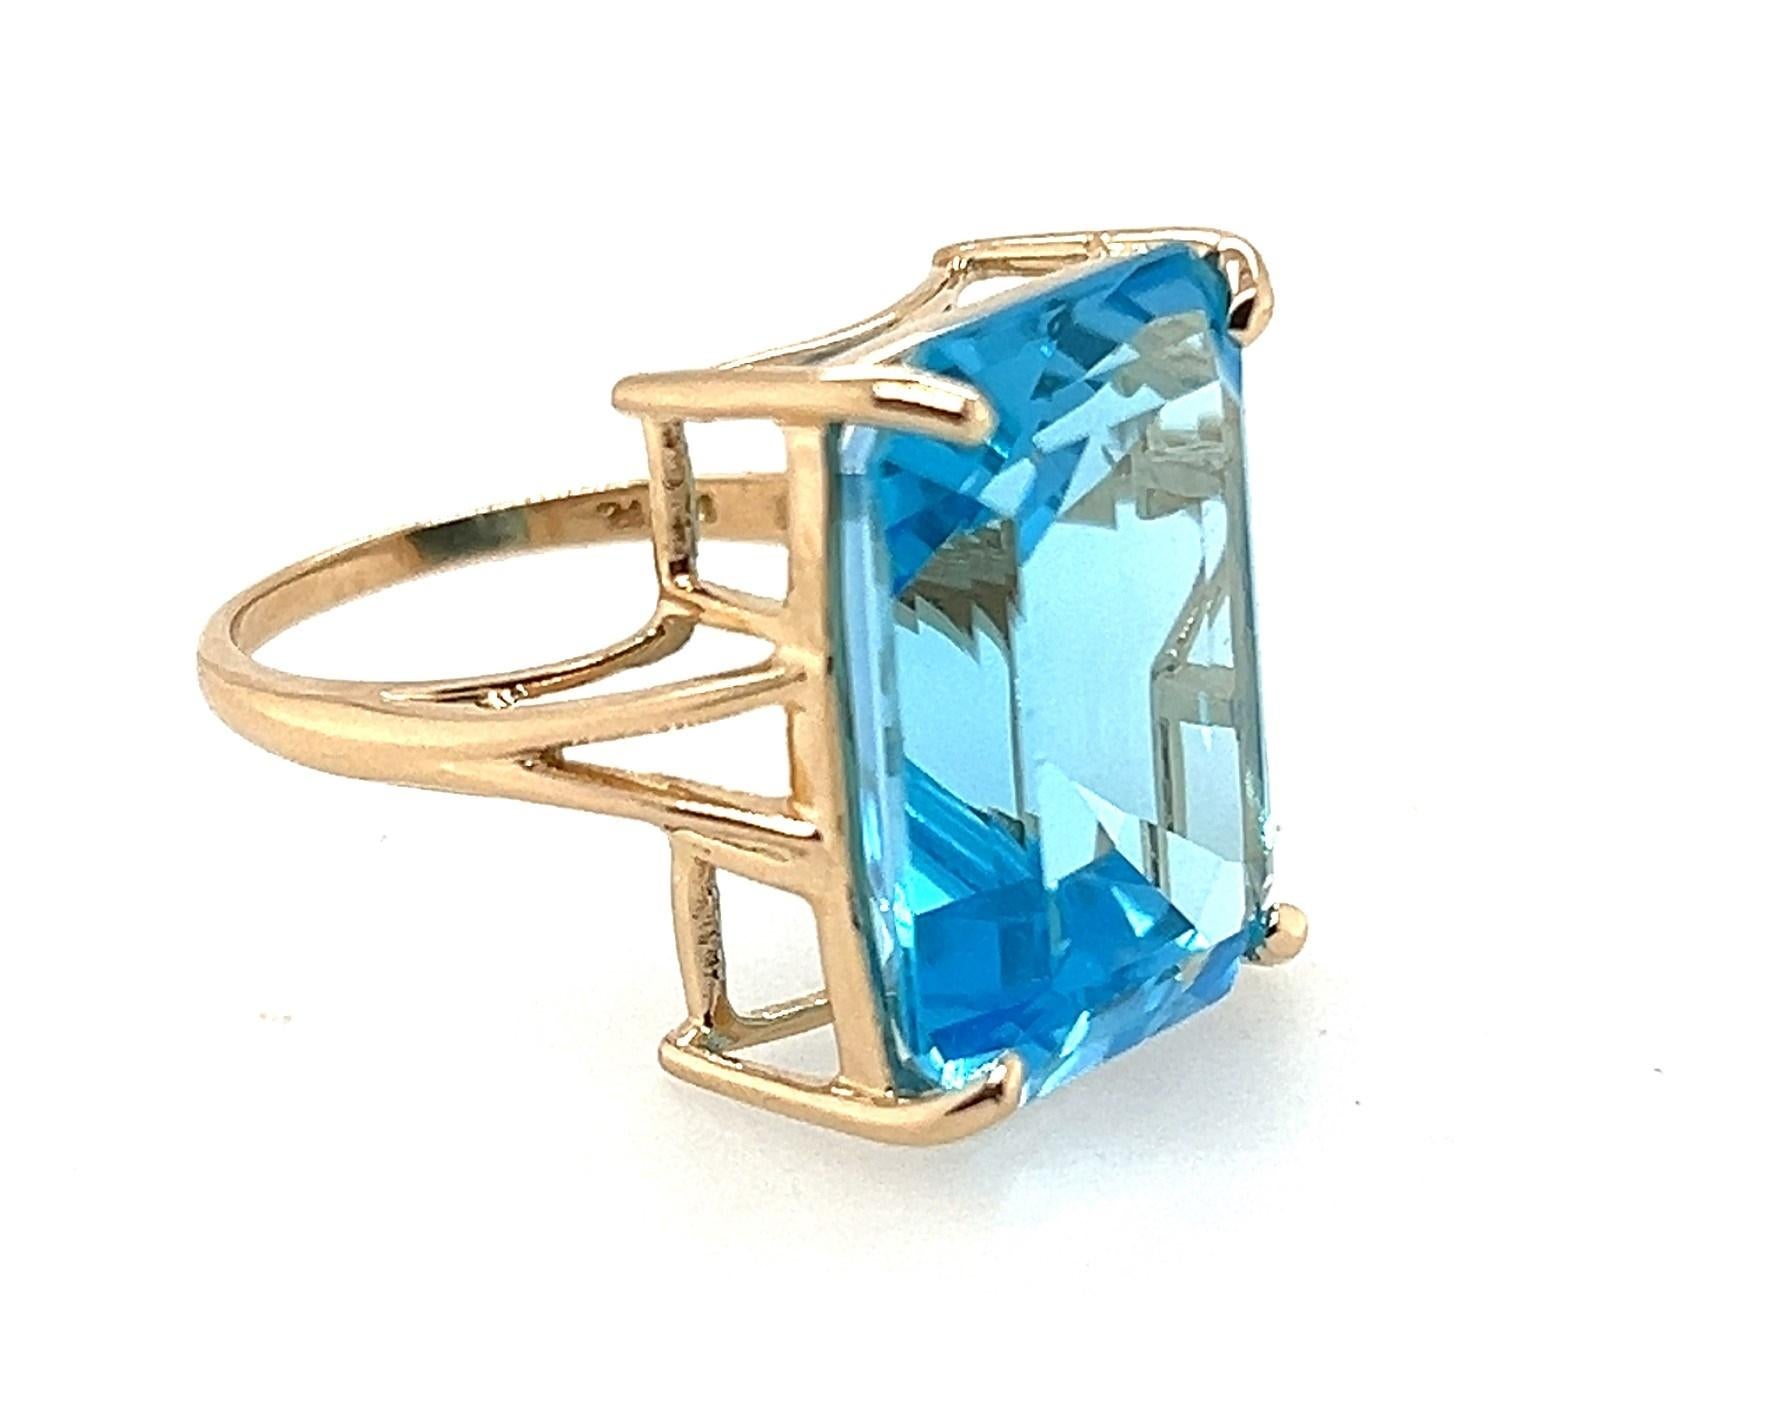 If you like big jewelry, this ring's got your number. 

How about a 23.66 carat rectangular step cut ELECTRIC London Blue Topaz the size of your finger from knuckle to knuckle? The size and color are stunning and people will see this ring from